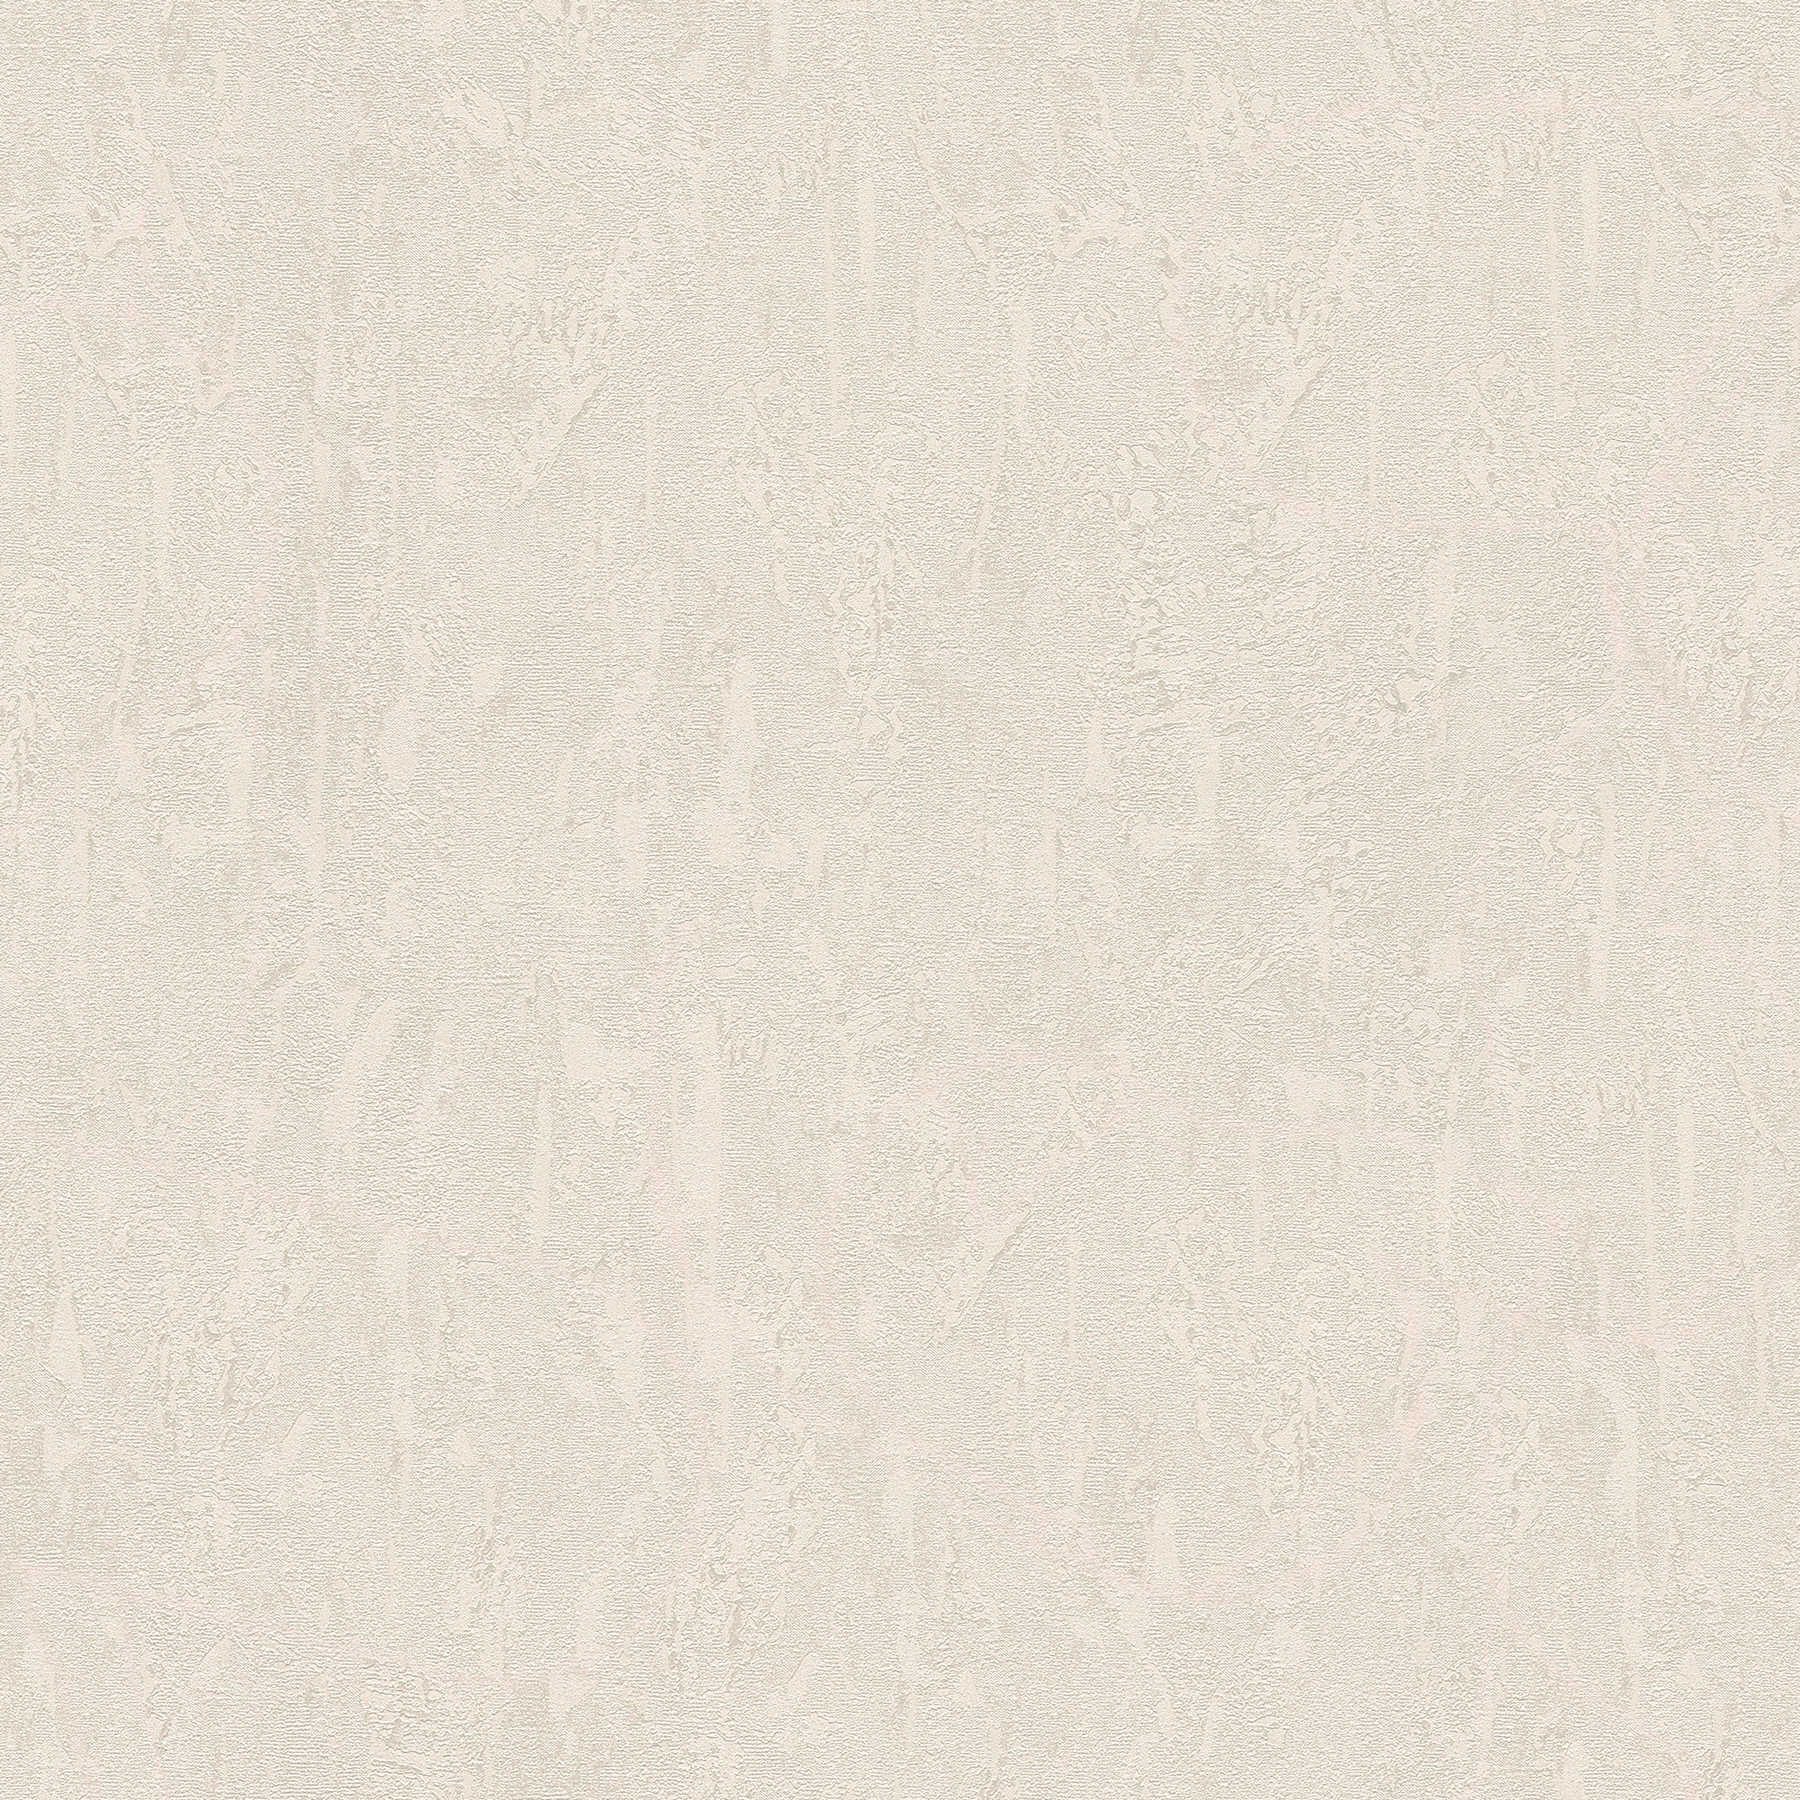 Vintage plaster look wallpaper with rustic texture pattern - cream
